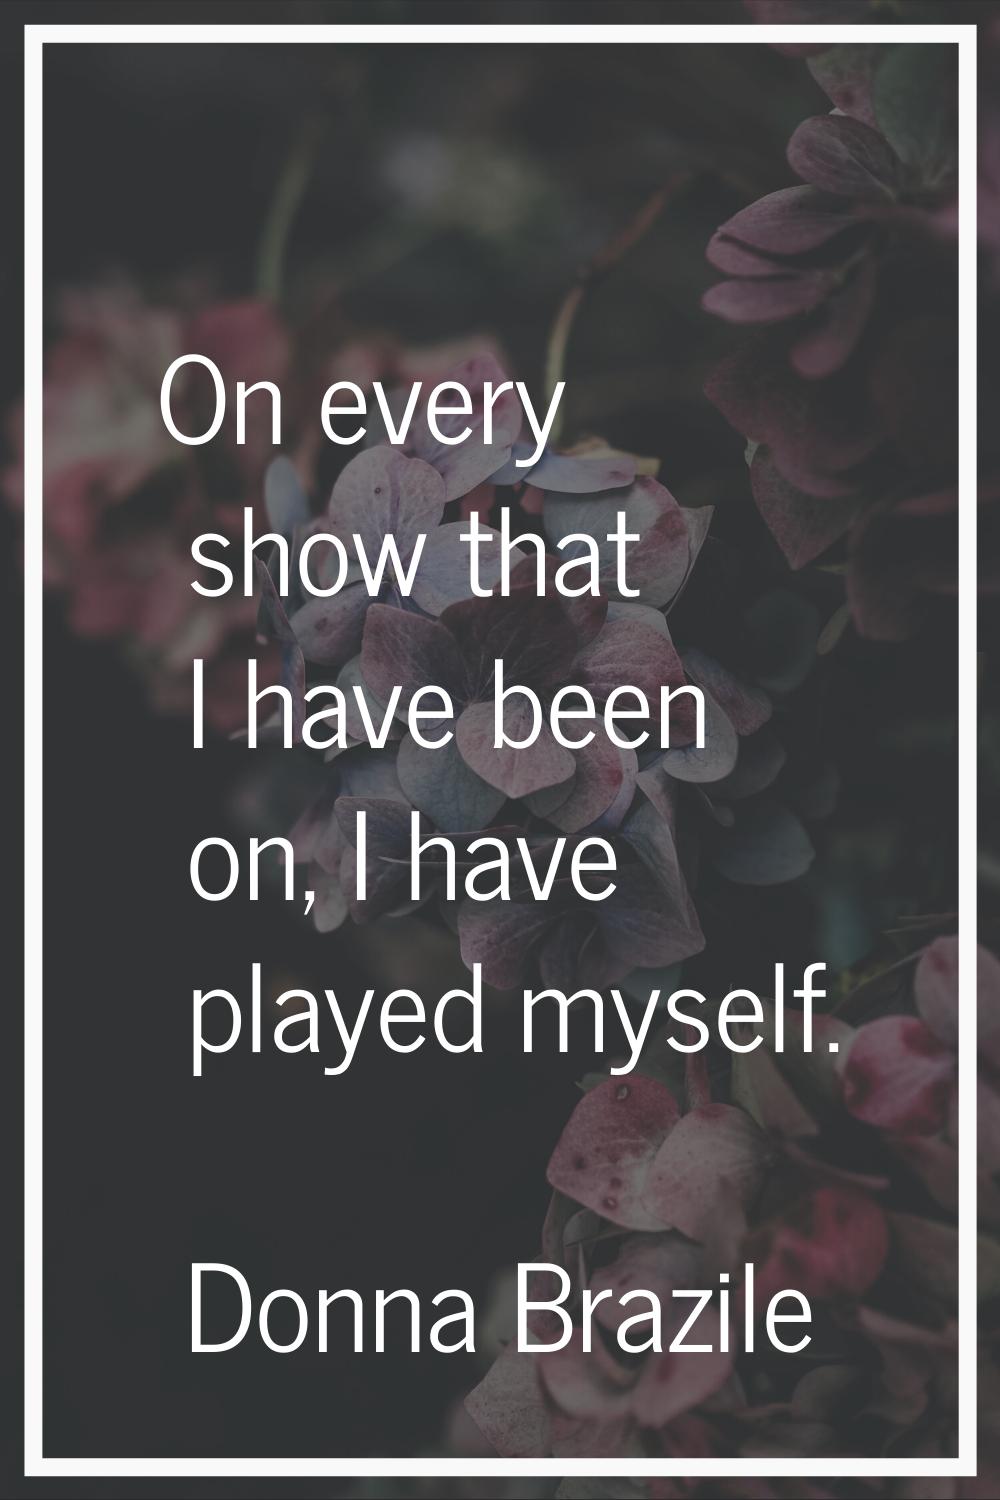 On every show that I have been on, I have played myself.